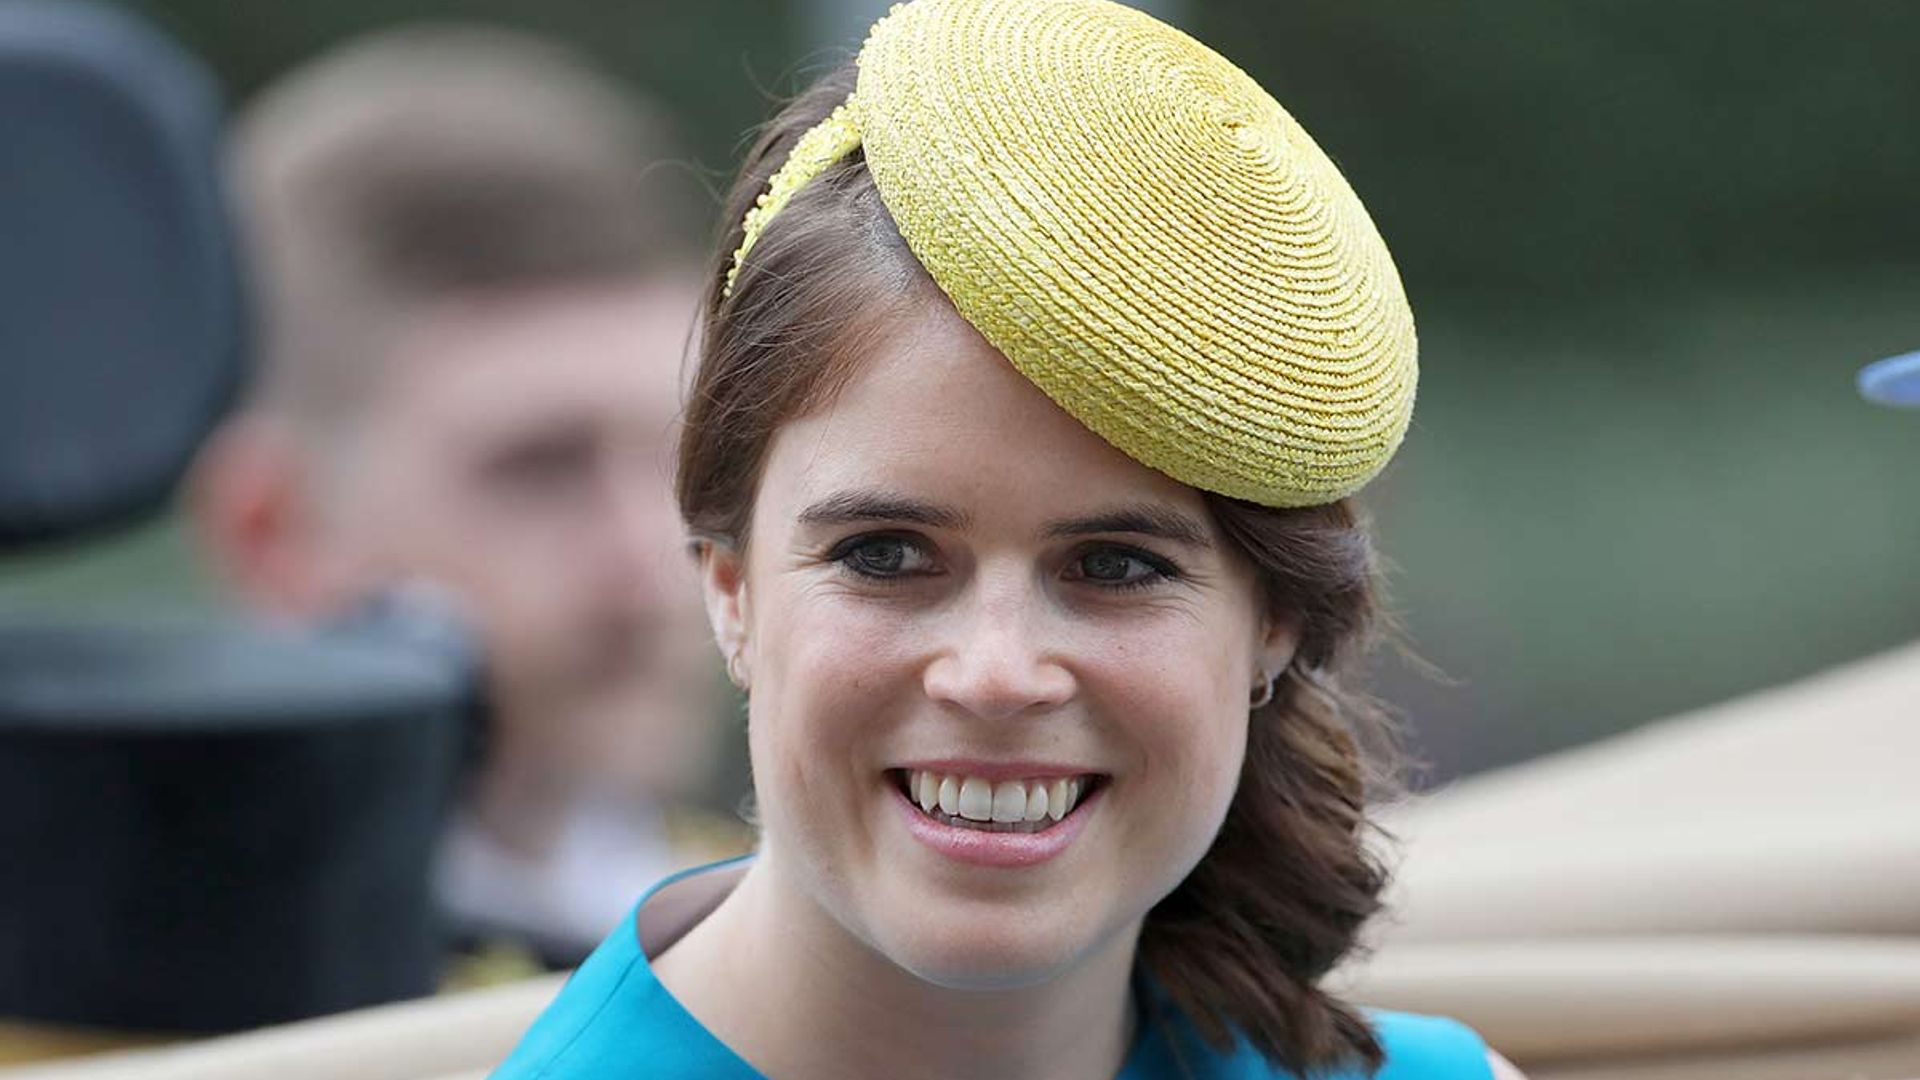 Princess Eugenie just shared the cutest never-before-seen holiday photo